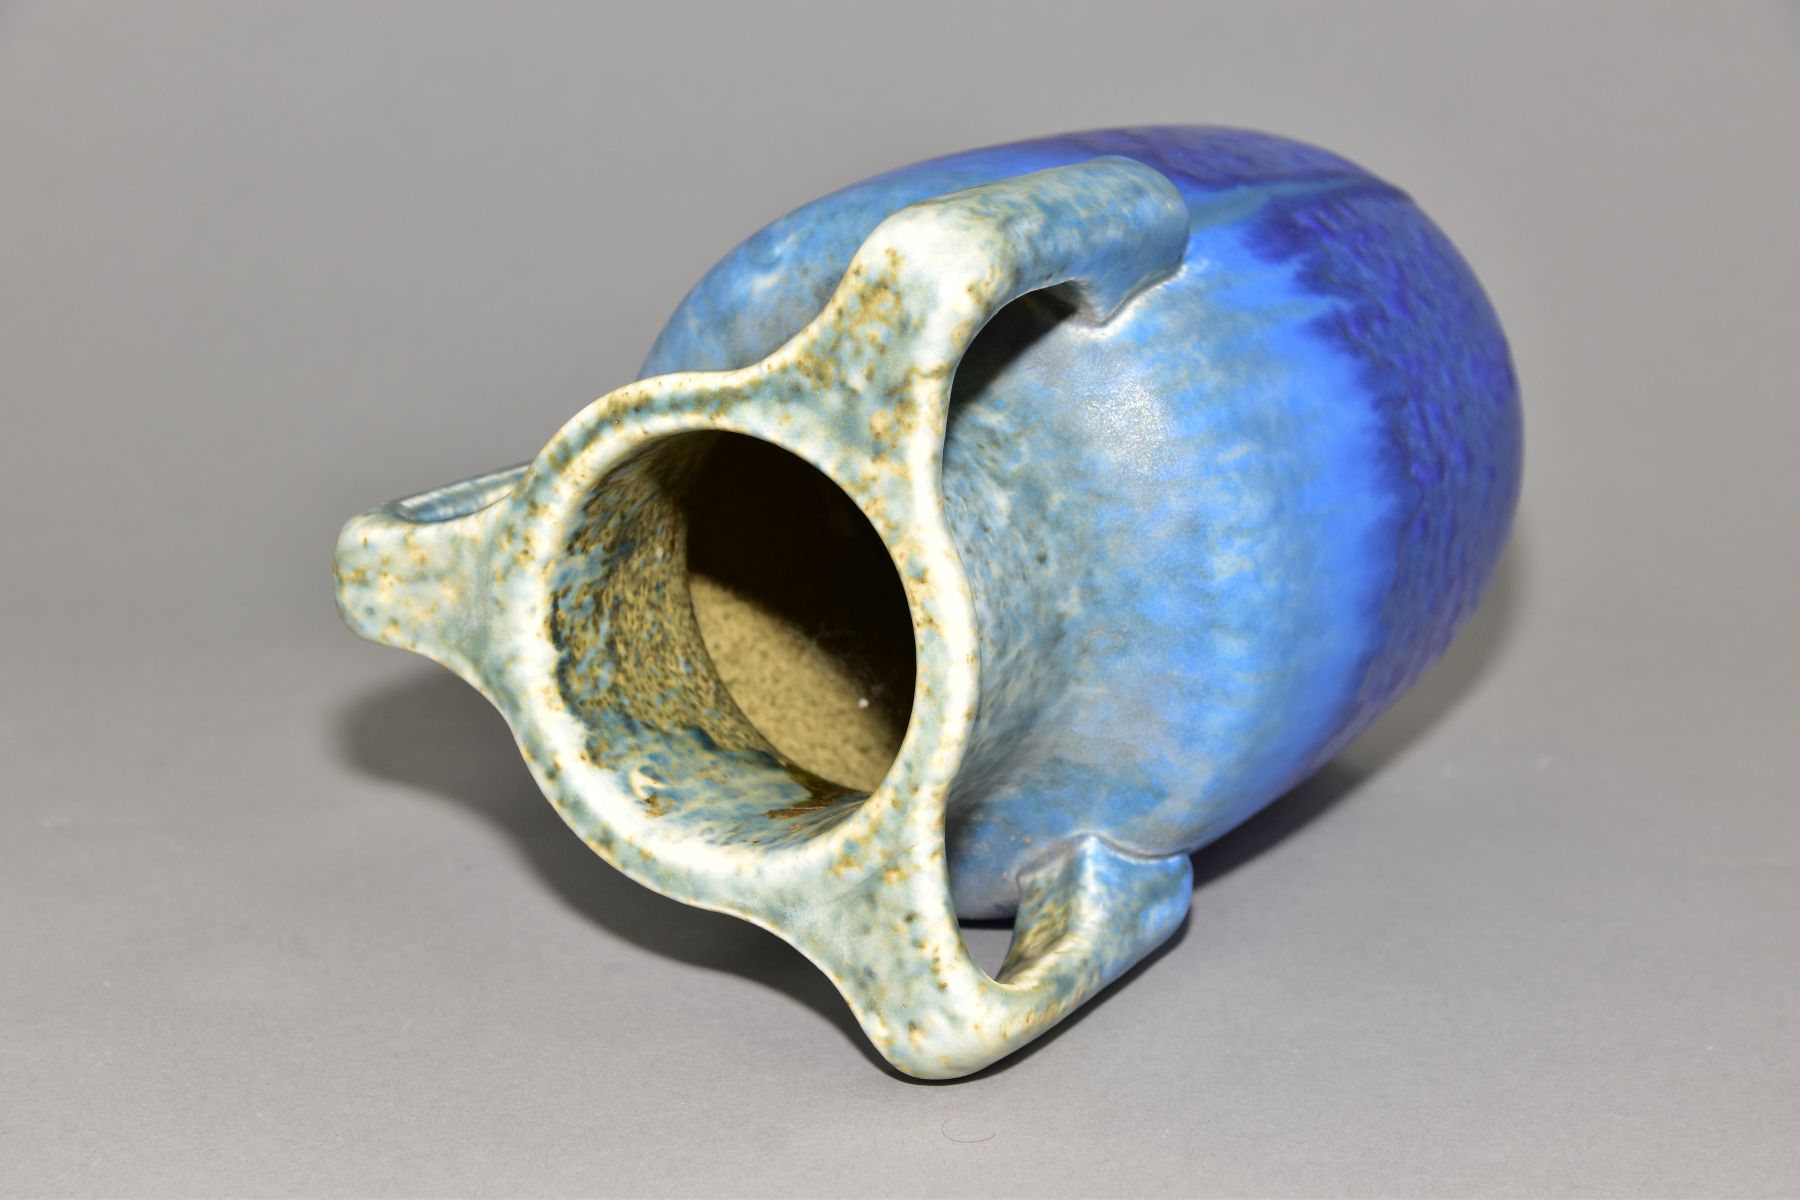 RUSKIN POTTERY, a three handled bottle shaped vase, mottled green fading to blue glaze, inscribed W. - Image 3 of 6